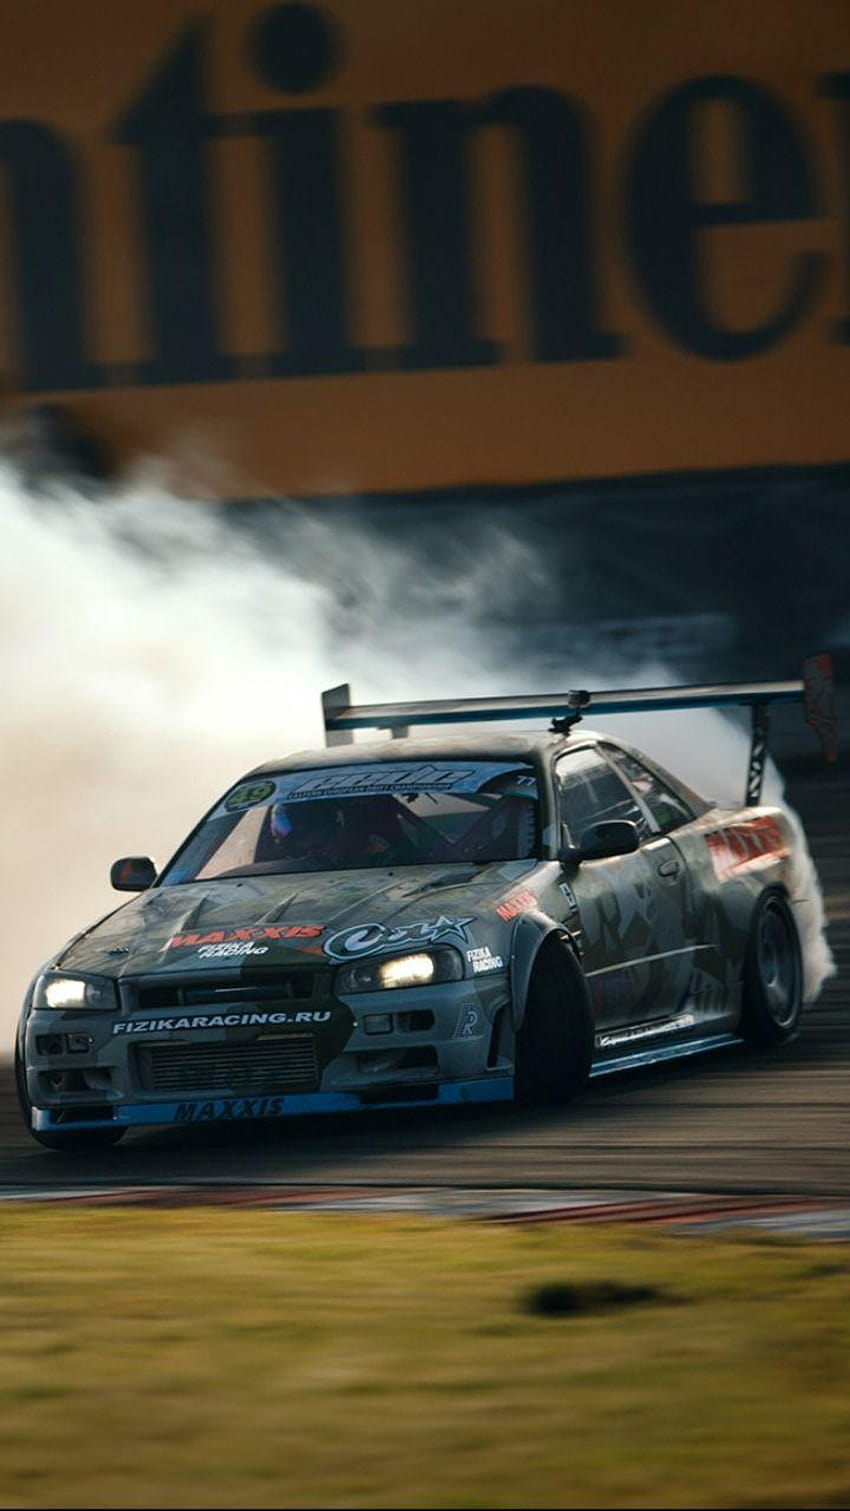 Drift Car Wallpapers 69 images